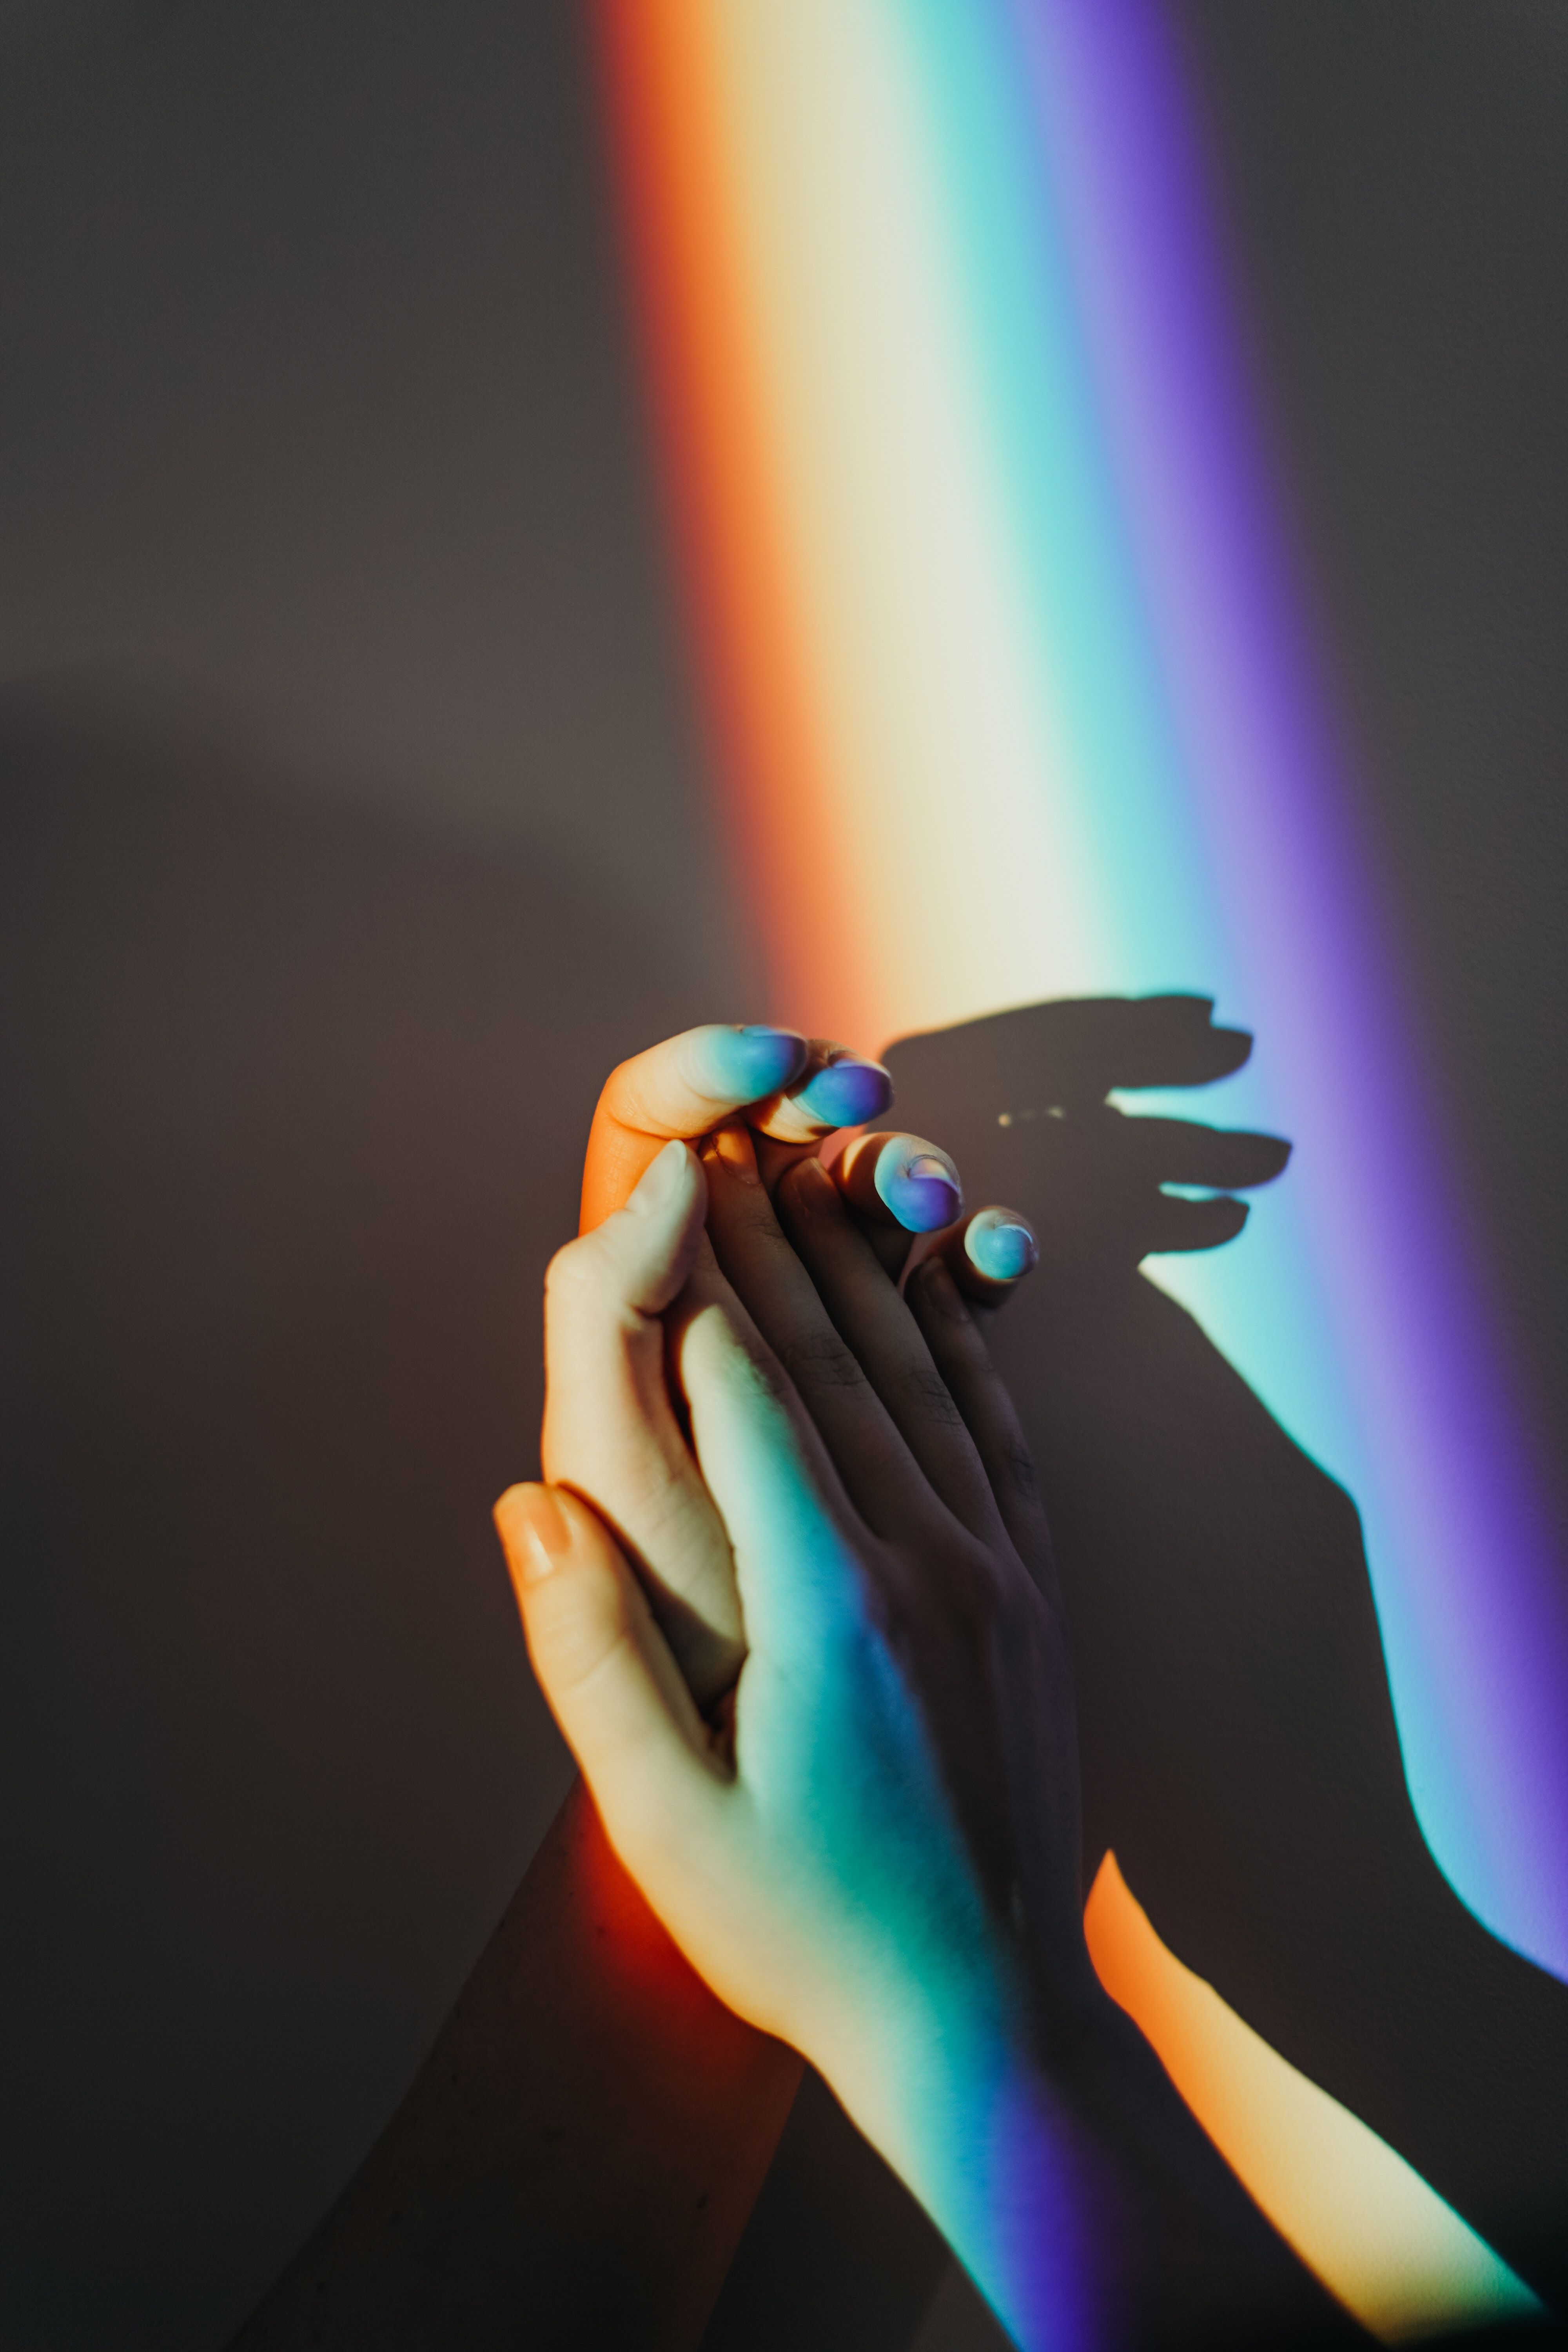 A hand holding another person's hands with rainbow light - Pride, gay